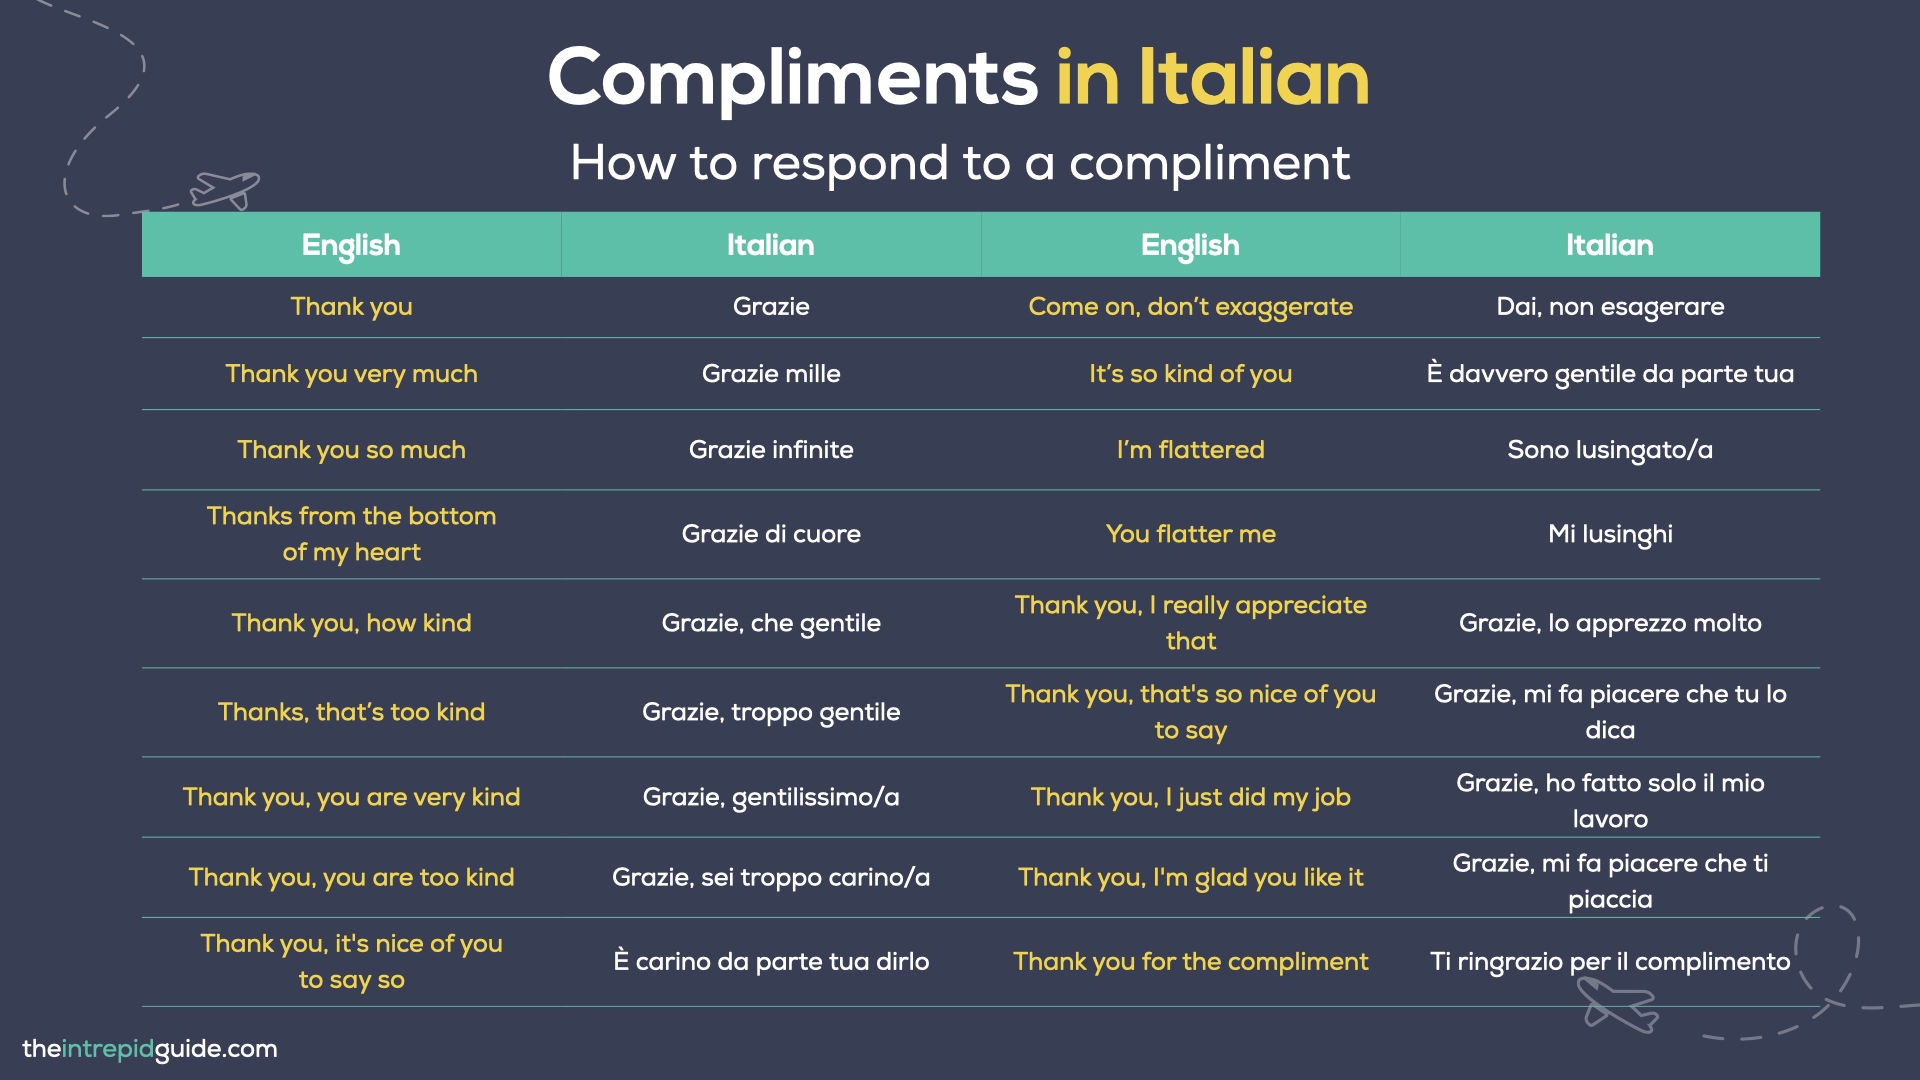 Compliments in Italian - How to respond to a compliment